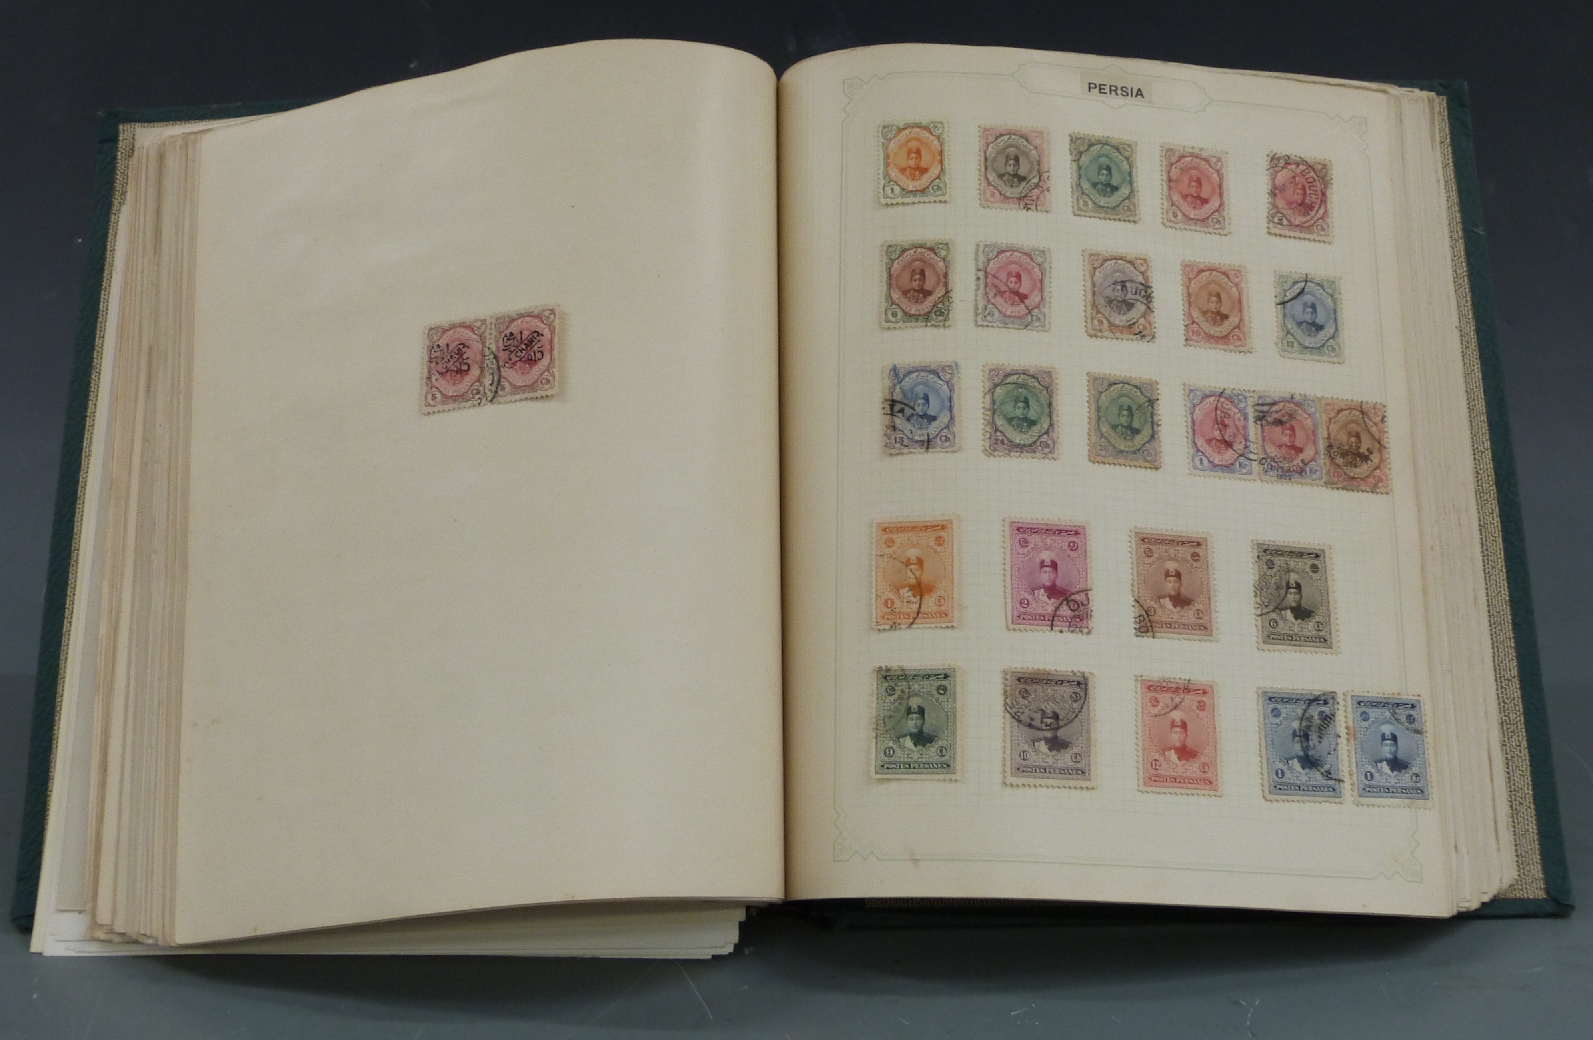 A loose leaf album of Commonwealth stamps plus some foreign stamps, mainly Victoria - George VI - Image 2 of 4